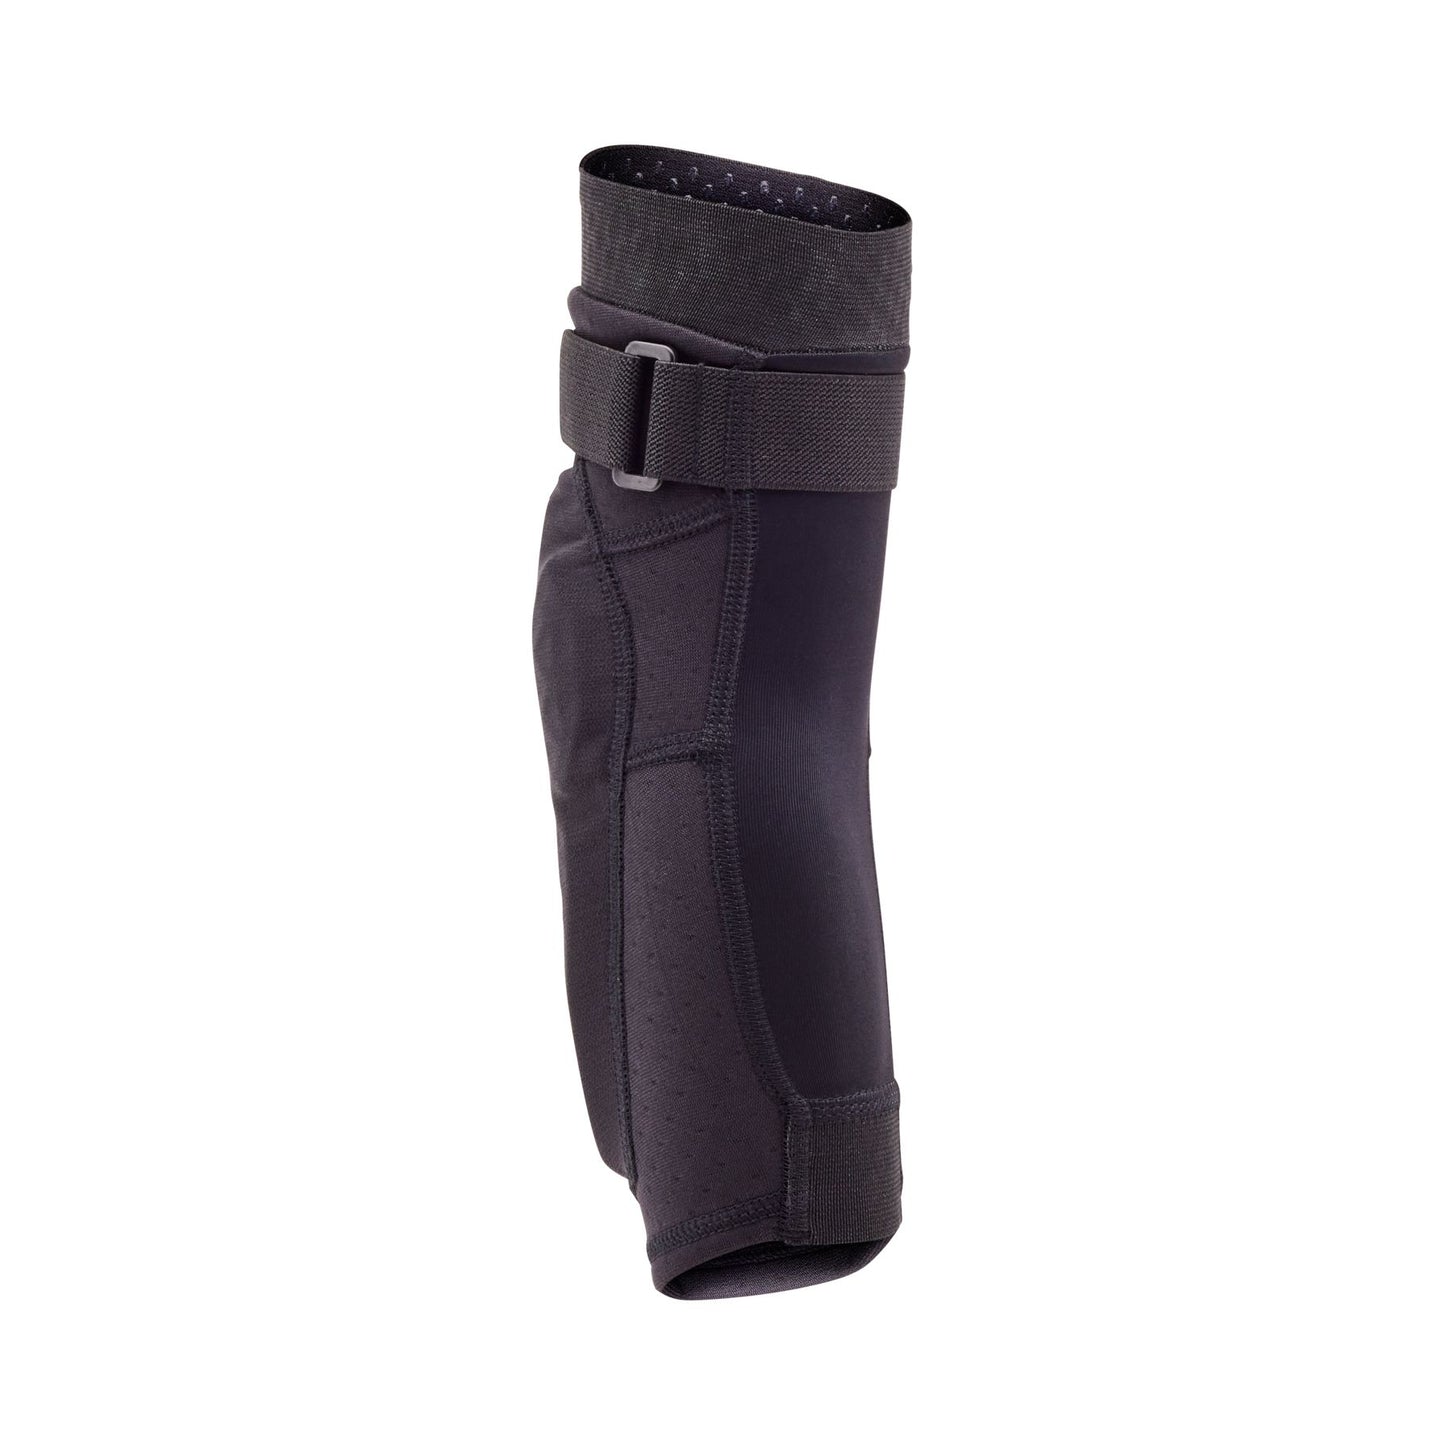 FOX Youth Launch Elbow Guard - Blk